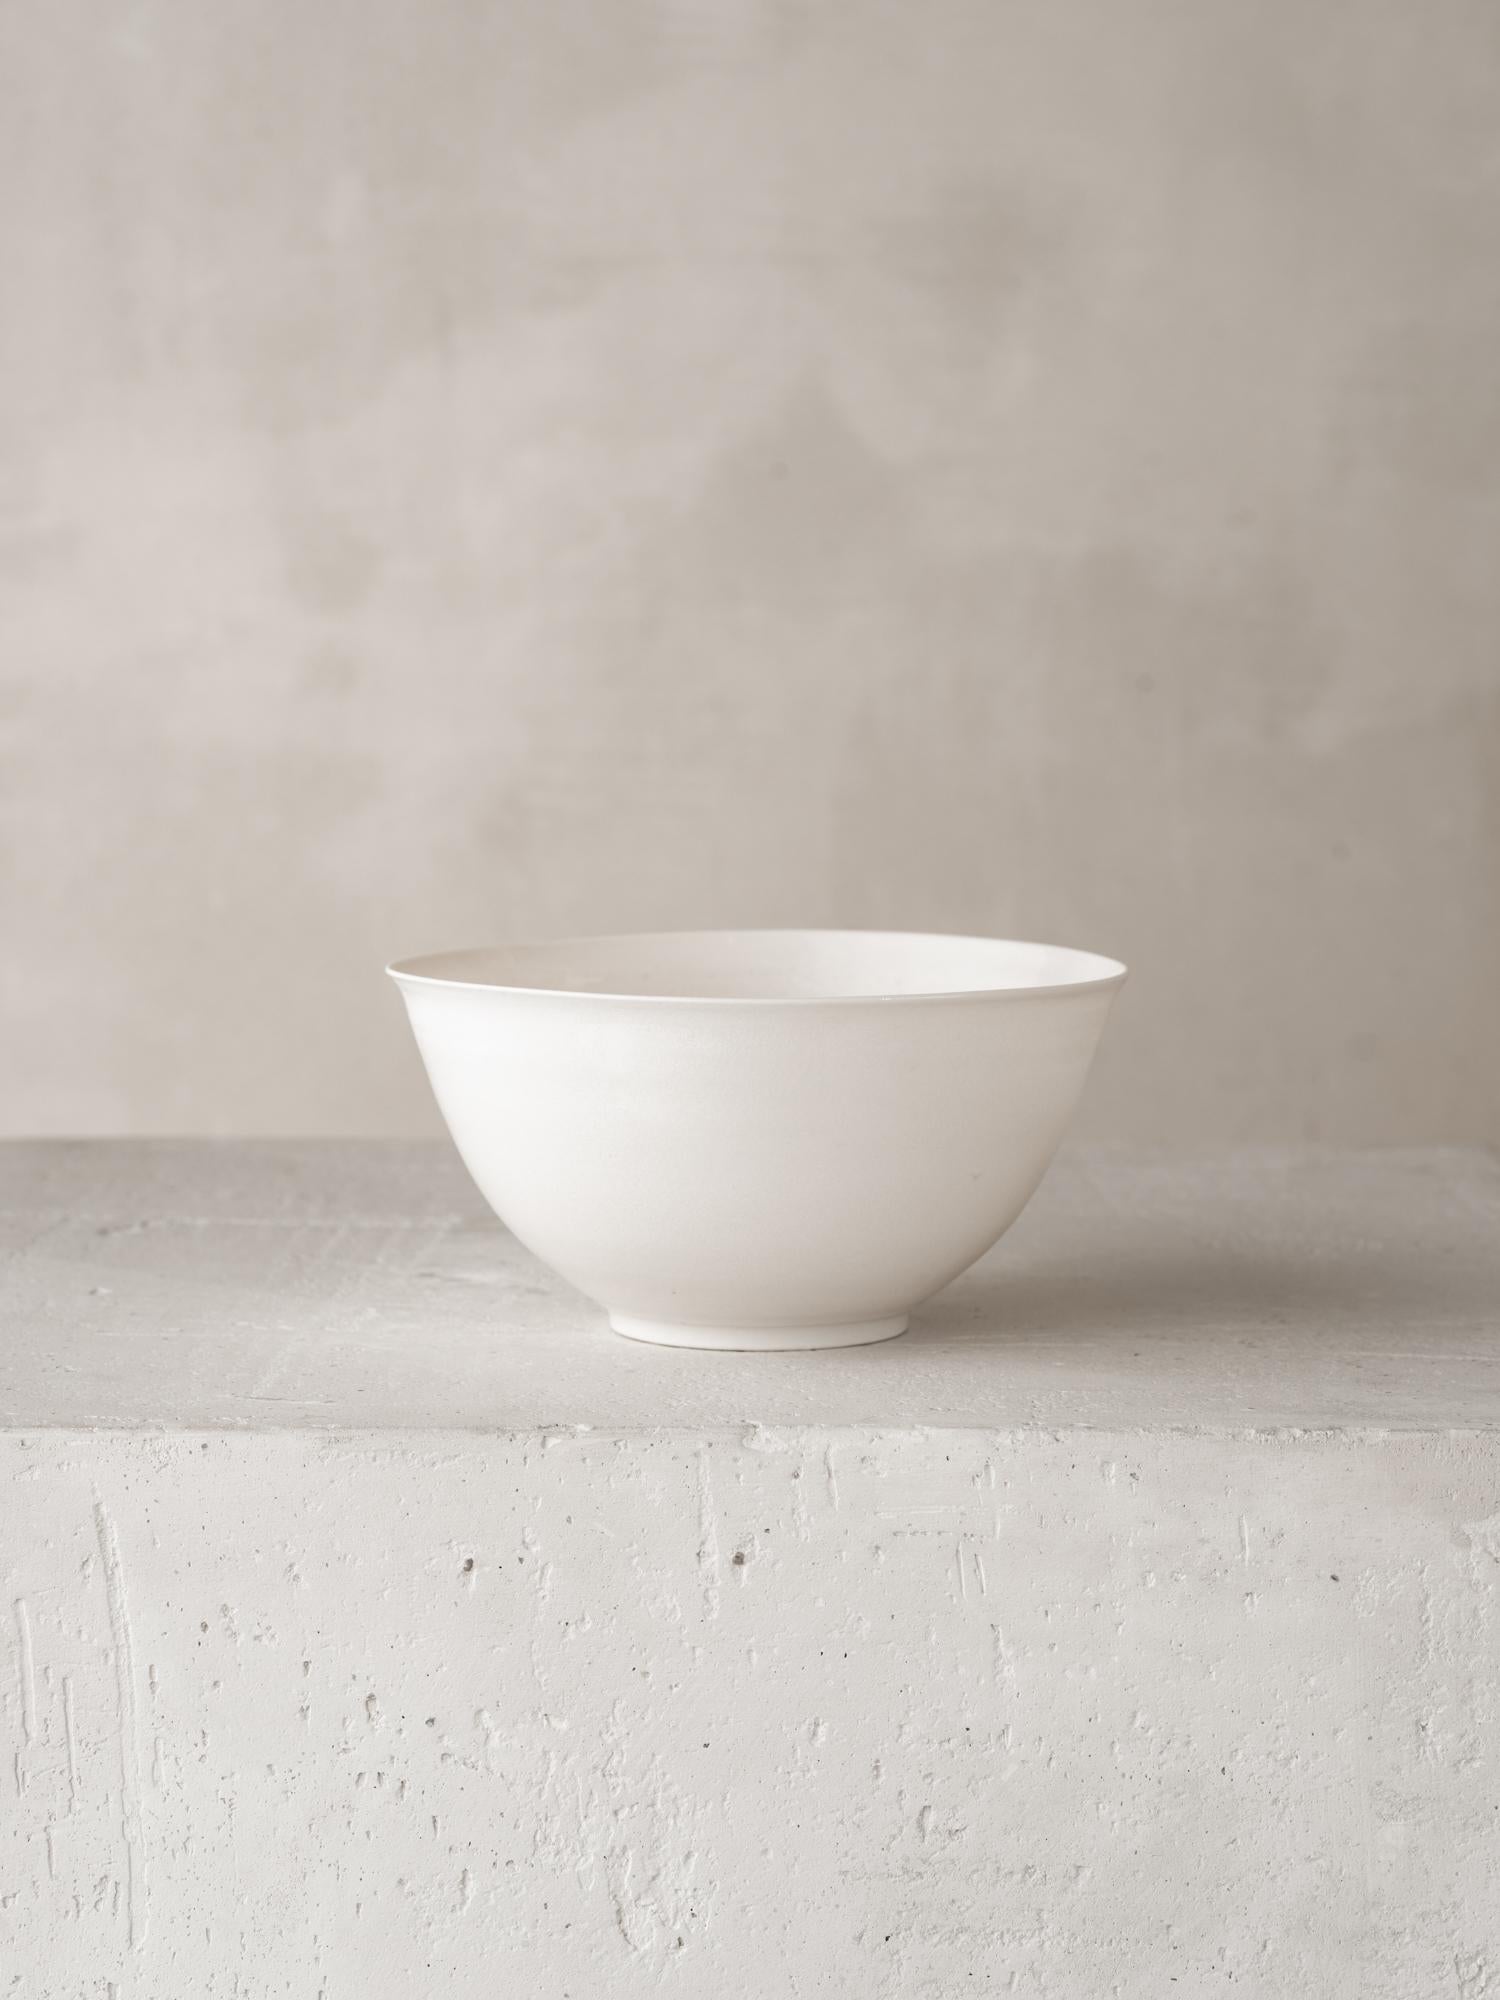 Materials: Wheel Thrown Porcelain

For over forty years Katherine Glenday has been creating meditative ceramic and porcelain pieces by hand in her South African studio. Remarkable in their translucency and luminosity, the porcelain vessel has been